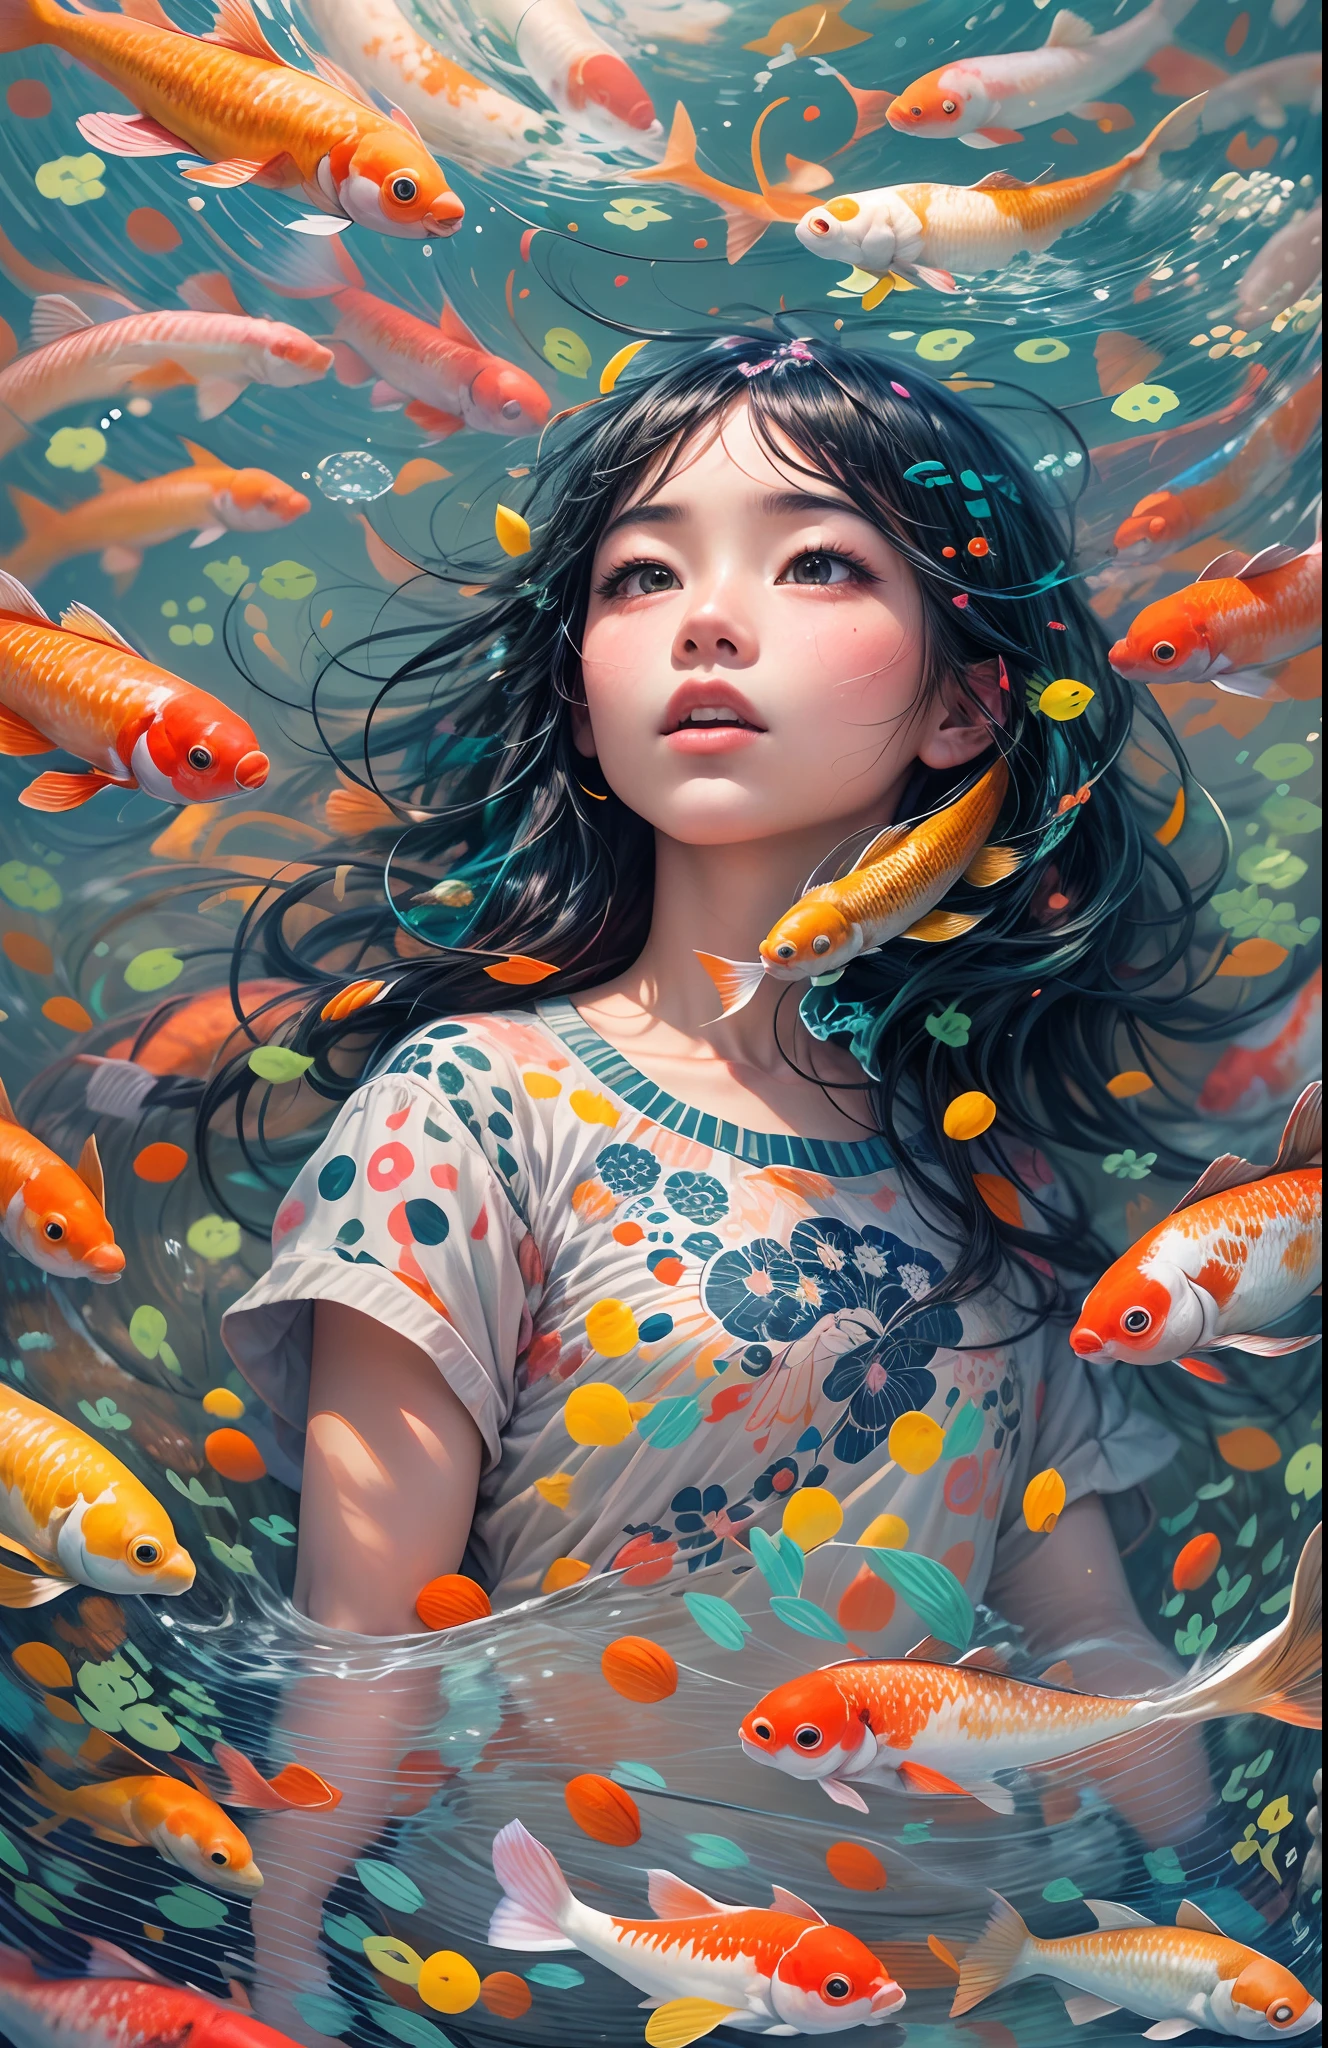 masterpiece, concept art, Picture a scene resonating with serenity and imagination. A young girl engrossed in a captivating novel, accompanied by a harmonious sky backdrop. Koi fishes dance gracefully around her, their vibrant colors popping against the serene sky. This exquisite artwork is a tribute to contemporary artist Yayoi Kusama, featuring intricate patterns and captivating play of color and light.